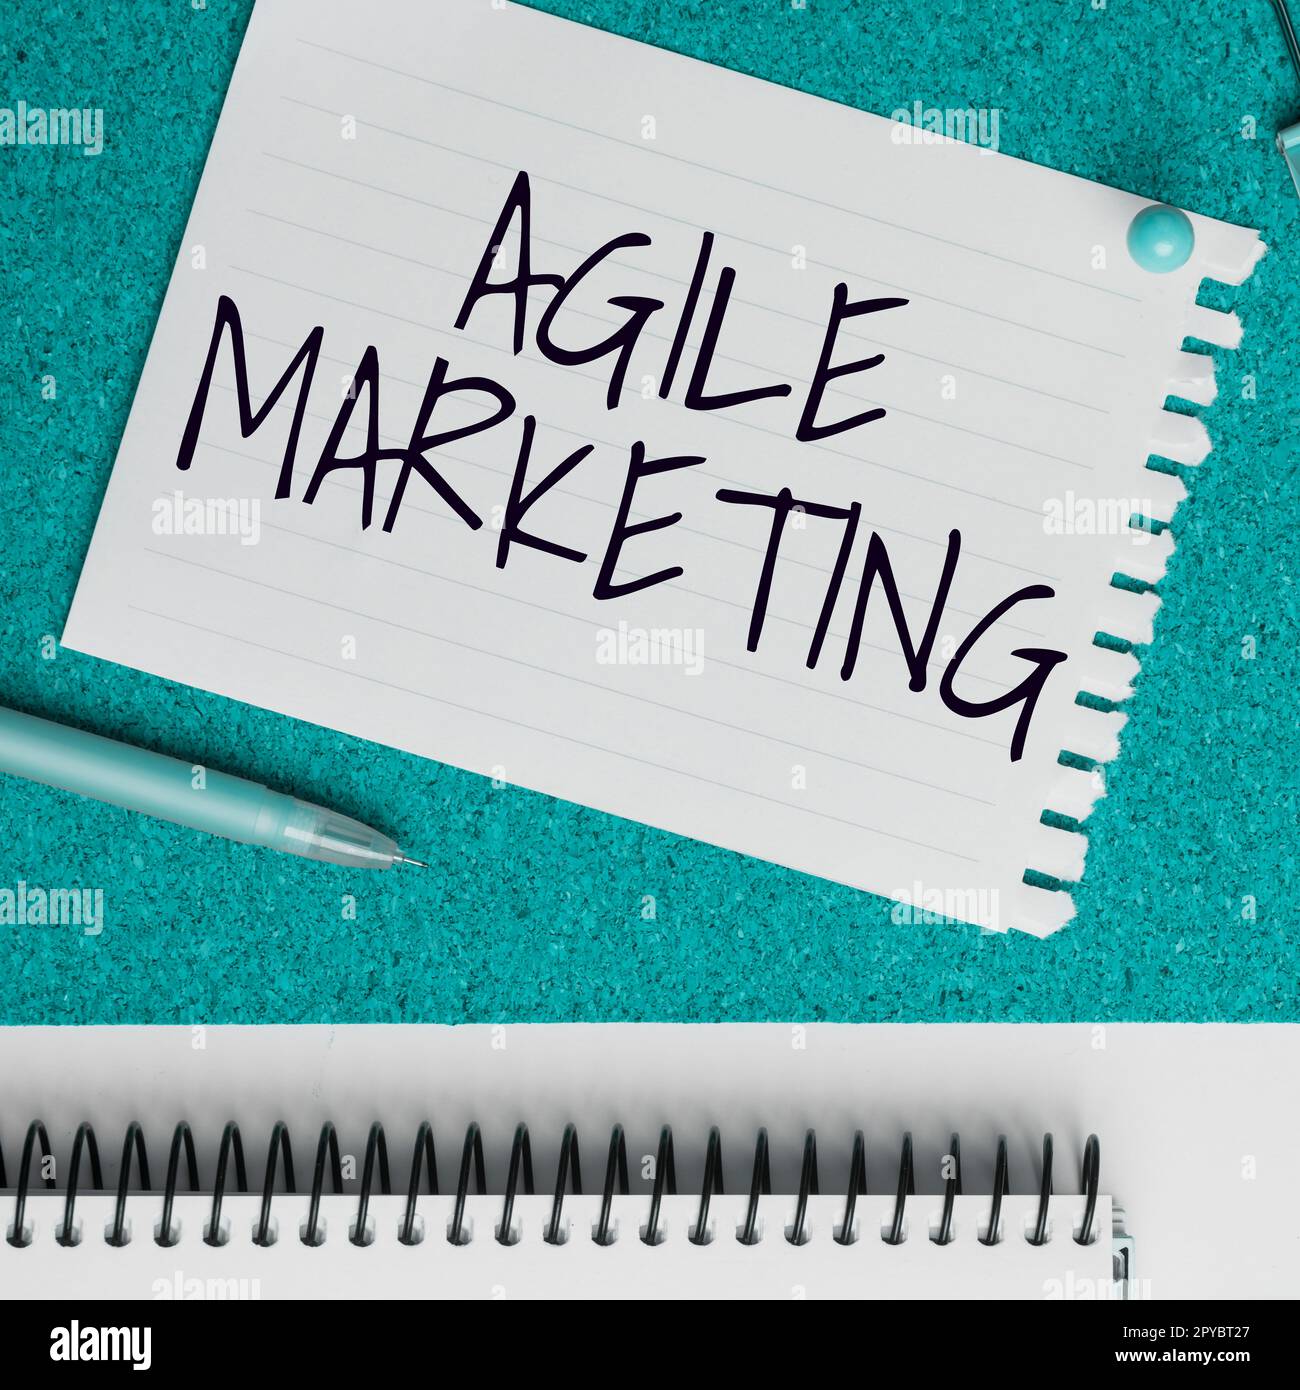 Text showing inspiration Agile Marketing. Business showcase focusing team efforts that deliver value to the end-customer Stock Photo